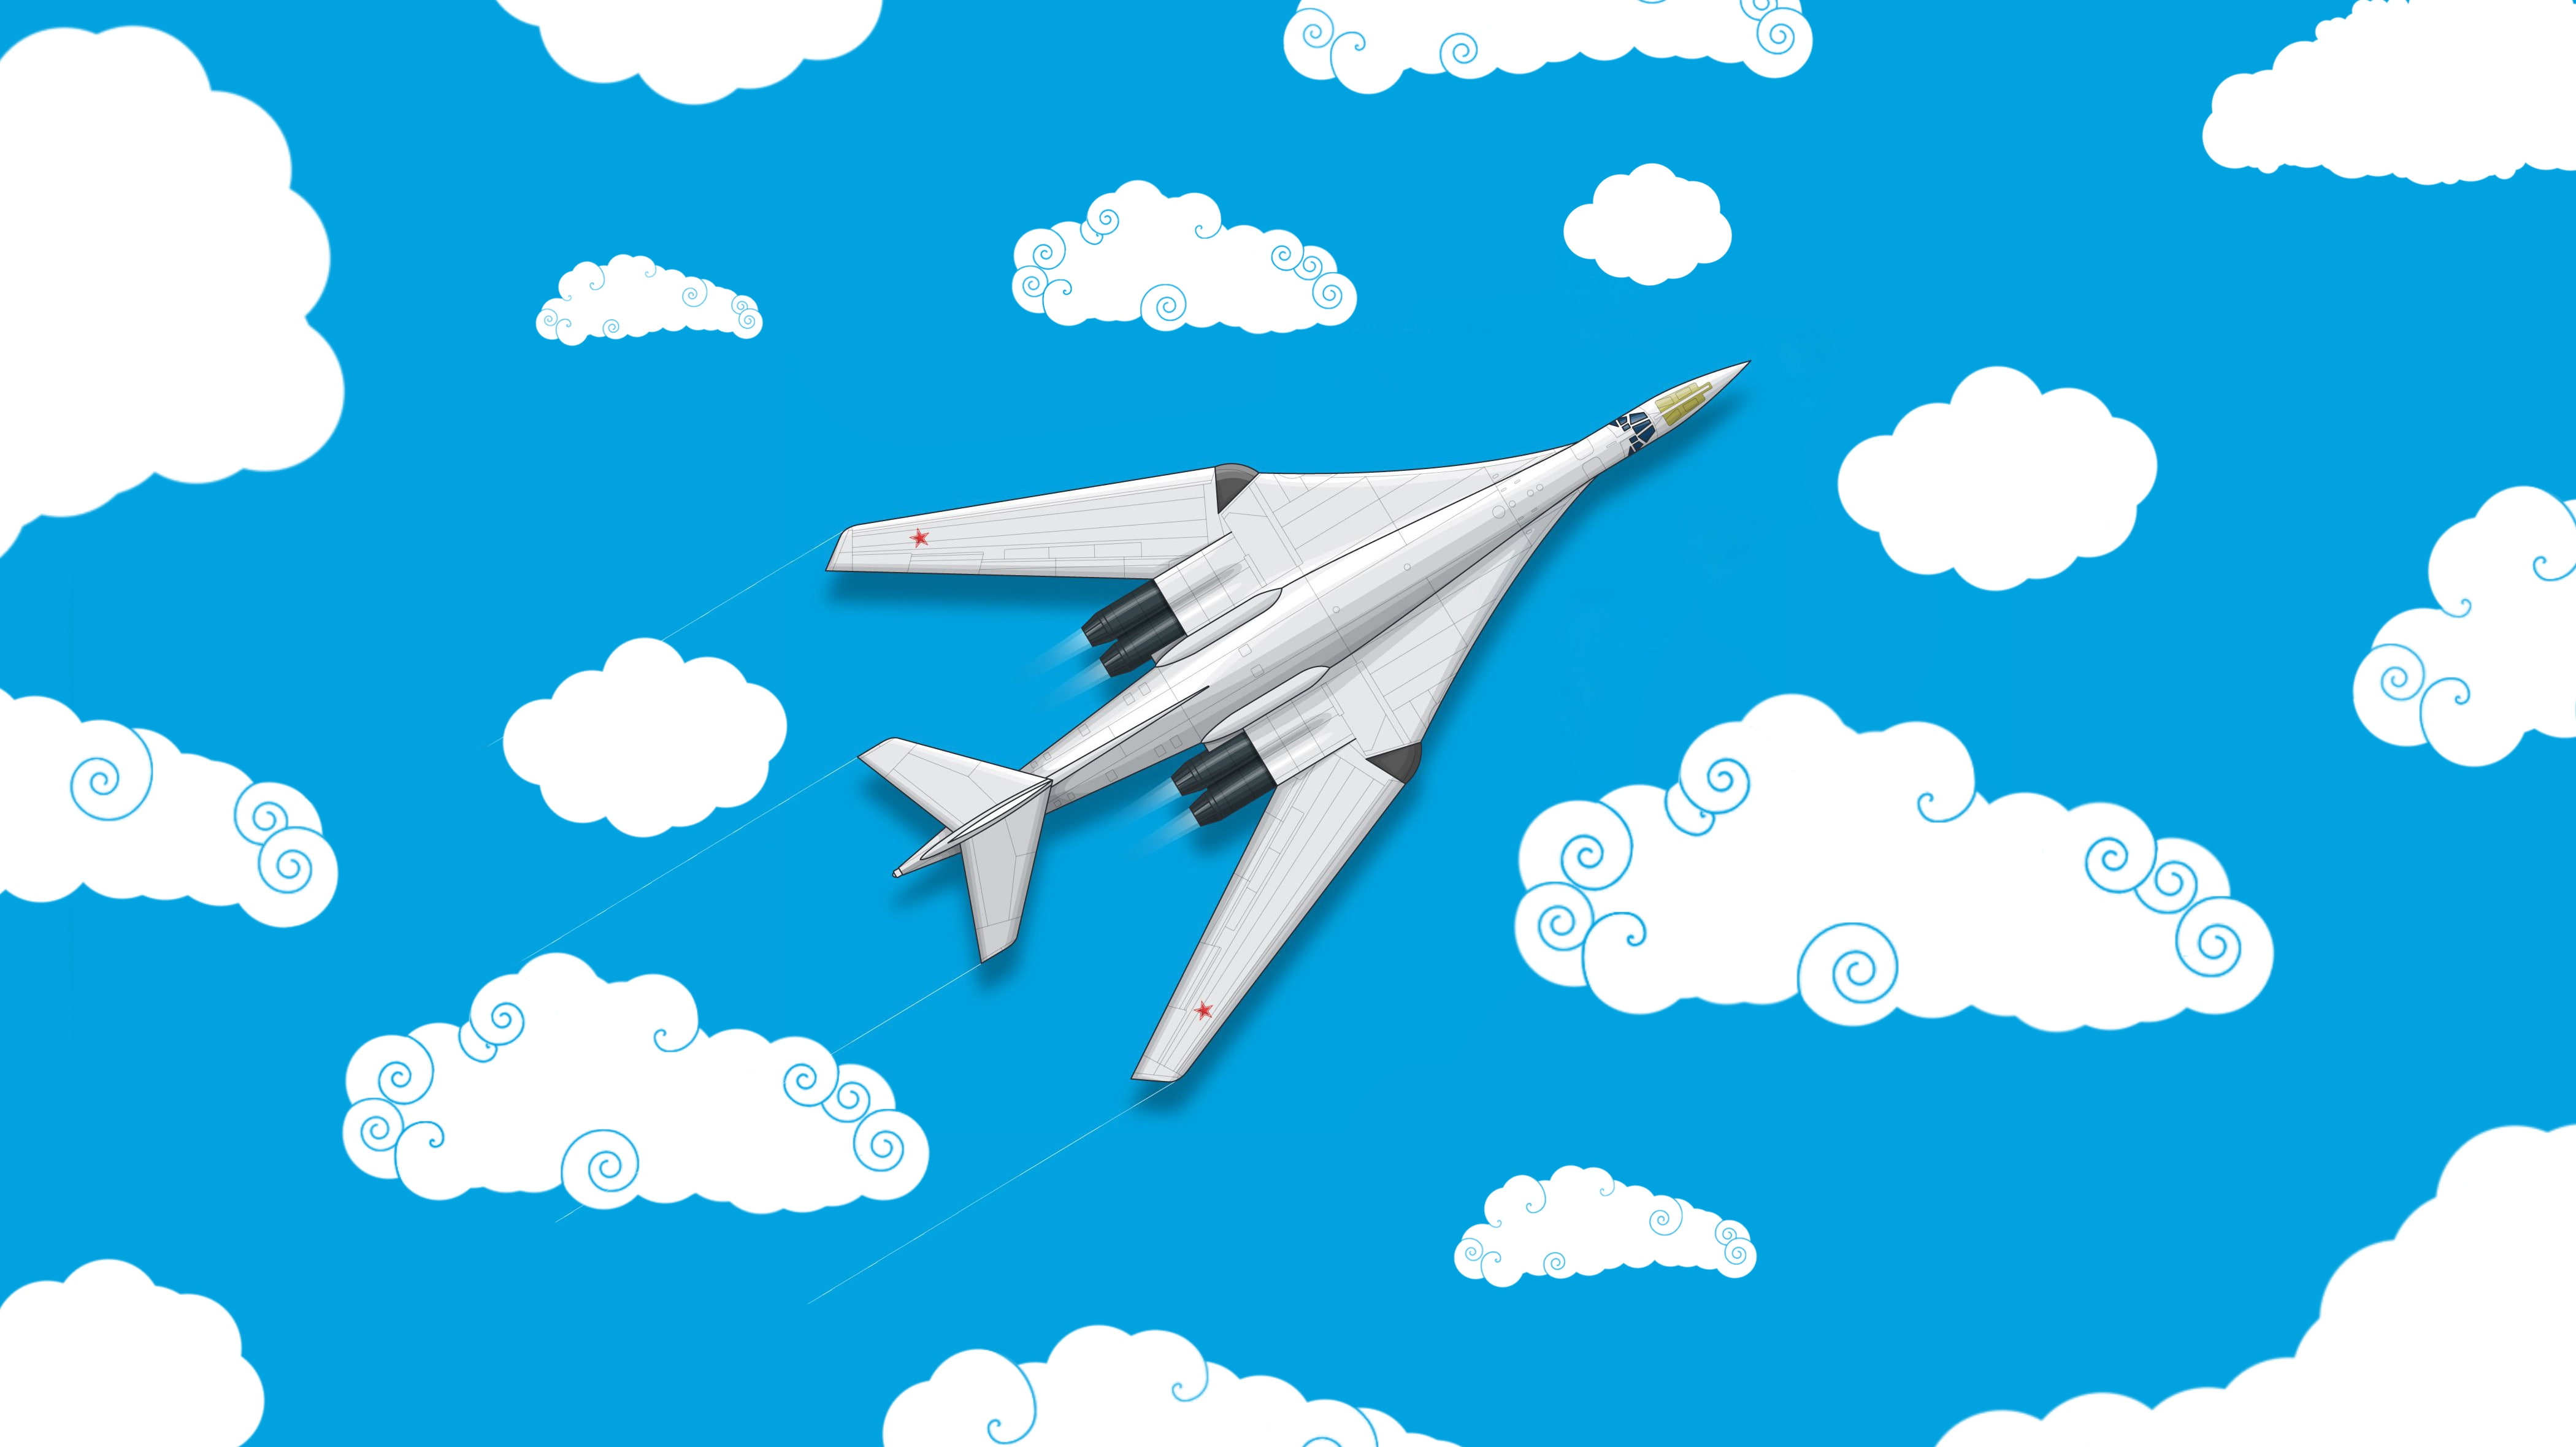 Clouds, Minimalism, The plane, Fighter, Russia, Art, The view from the top